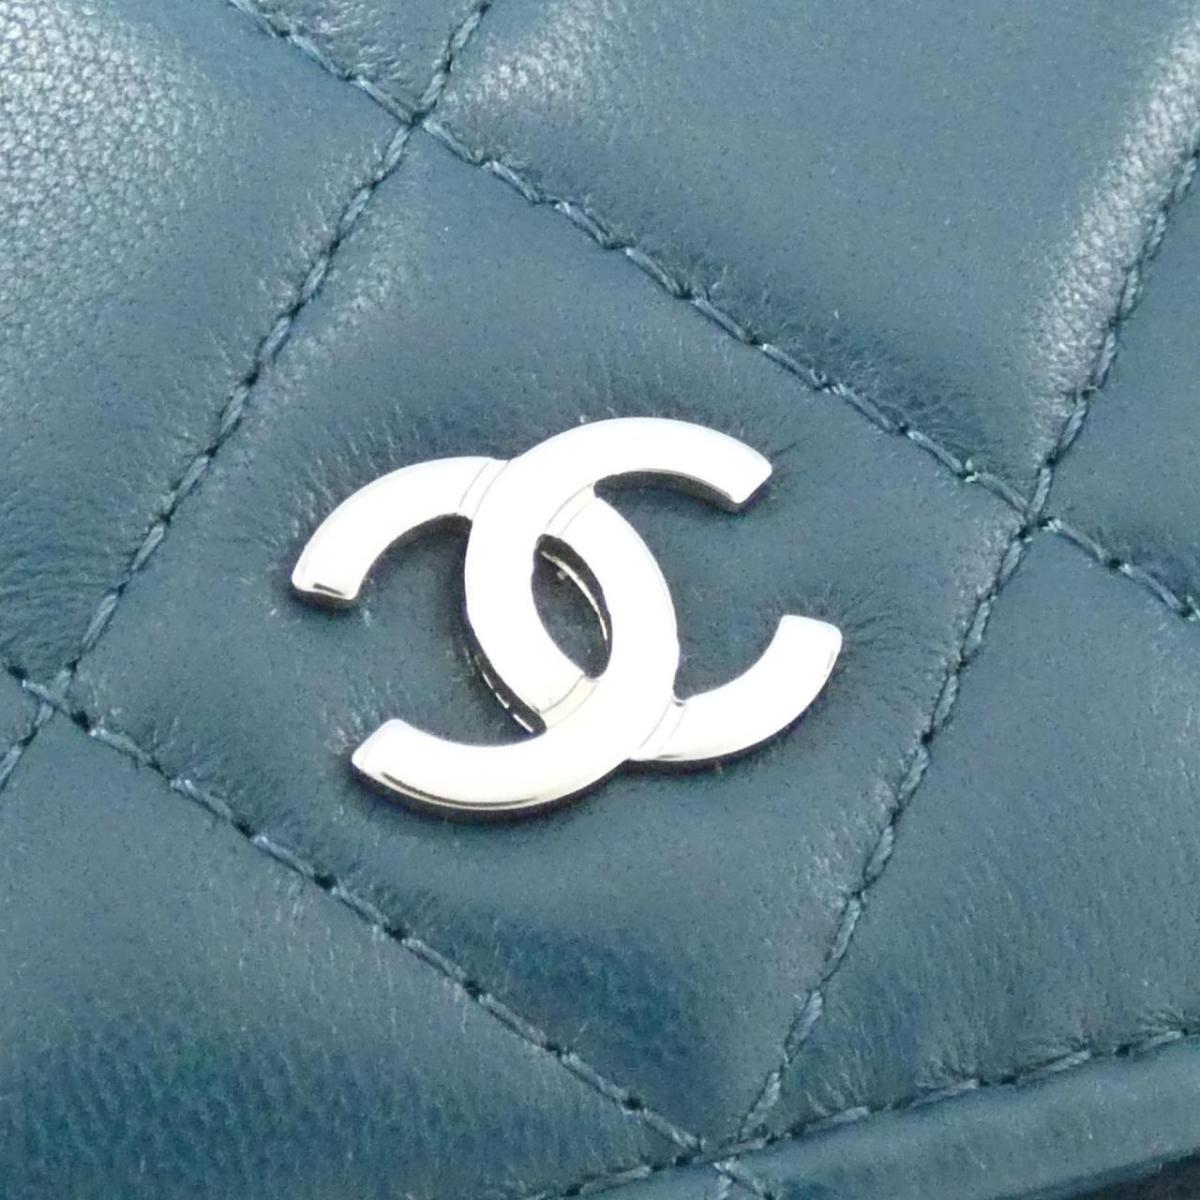 Chanel Timeless Classical Line AP1649 Chain Wallet